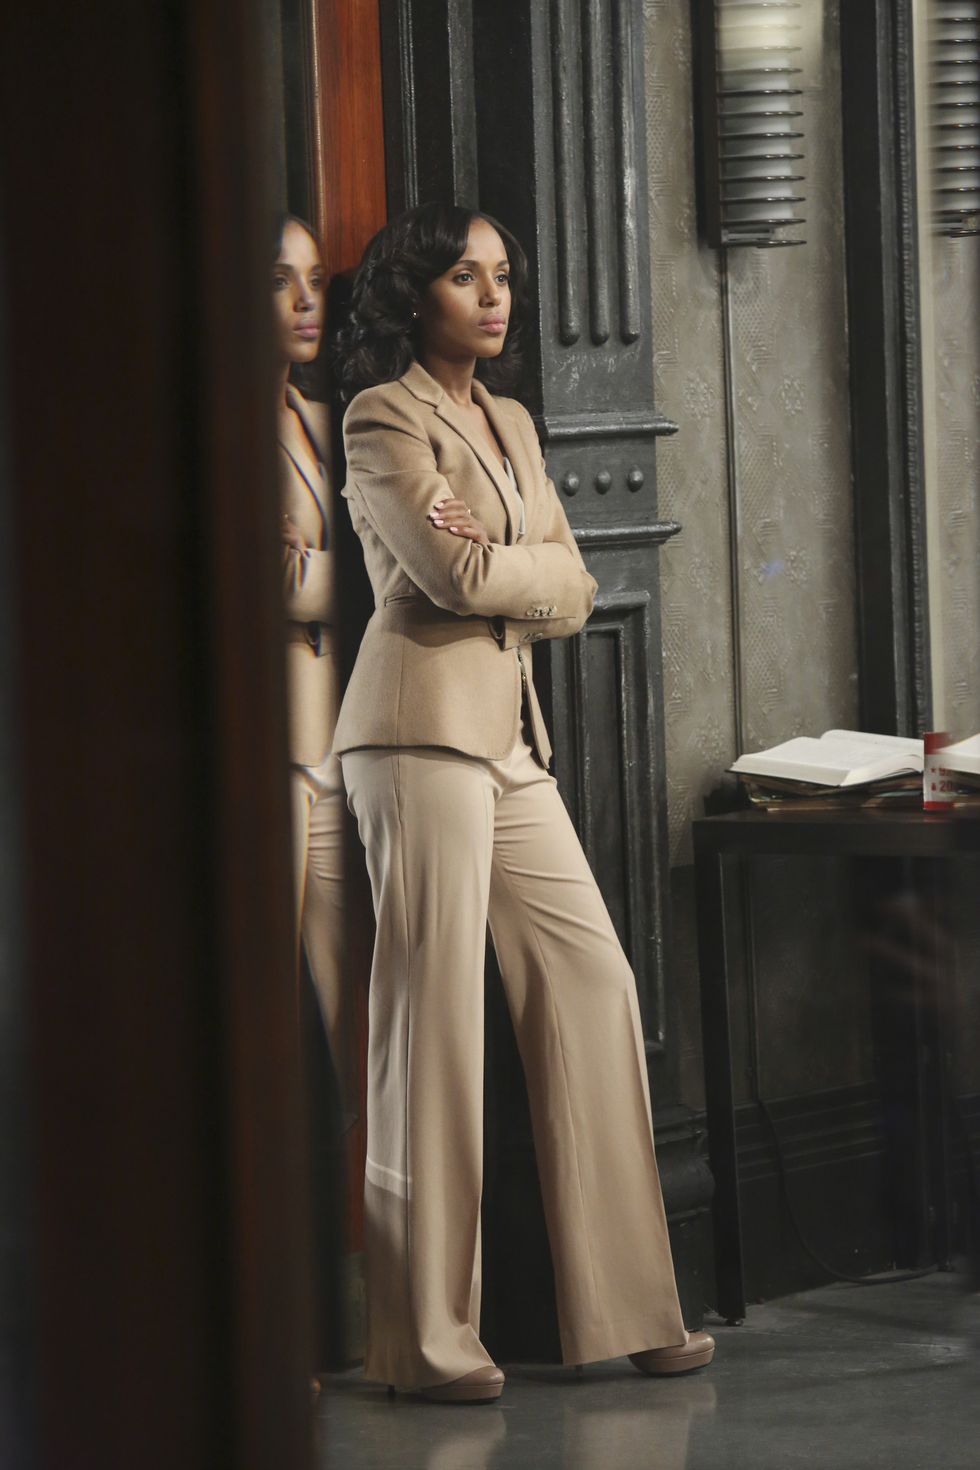 Scandal's Olivia Pope has got power dressing nailed